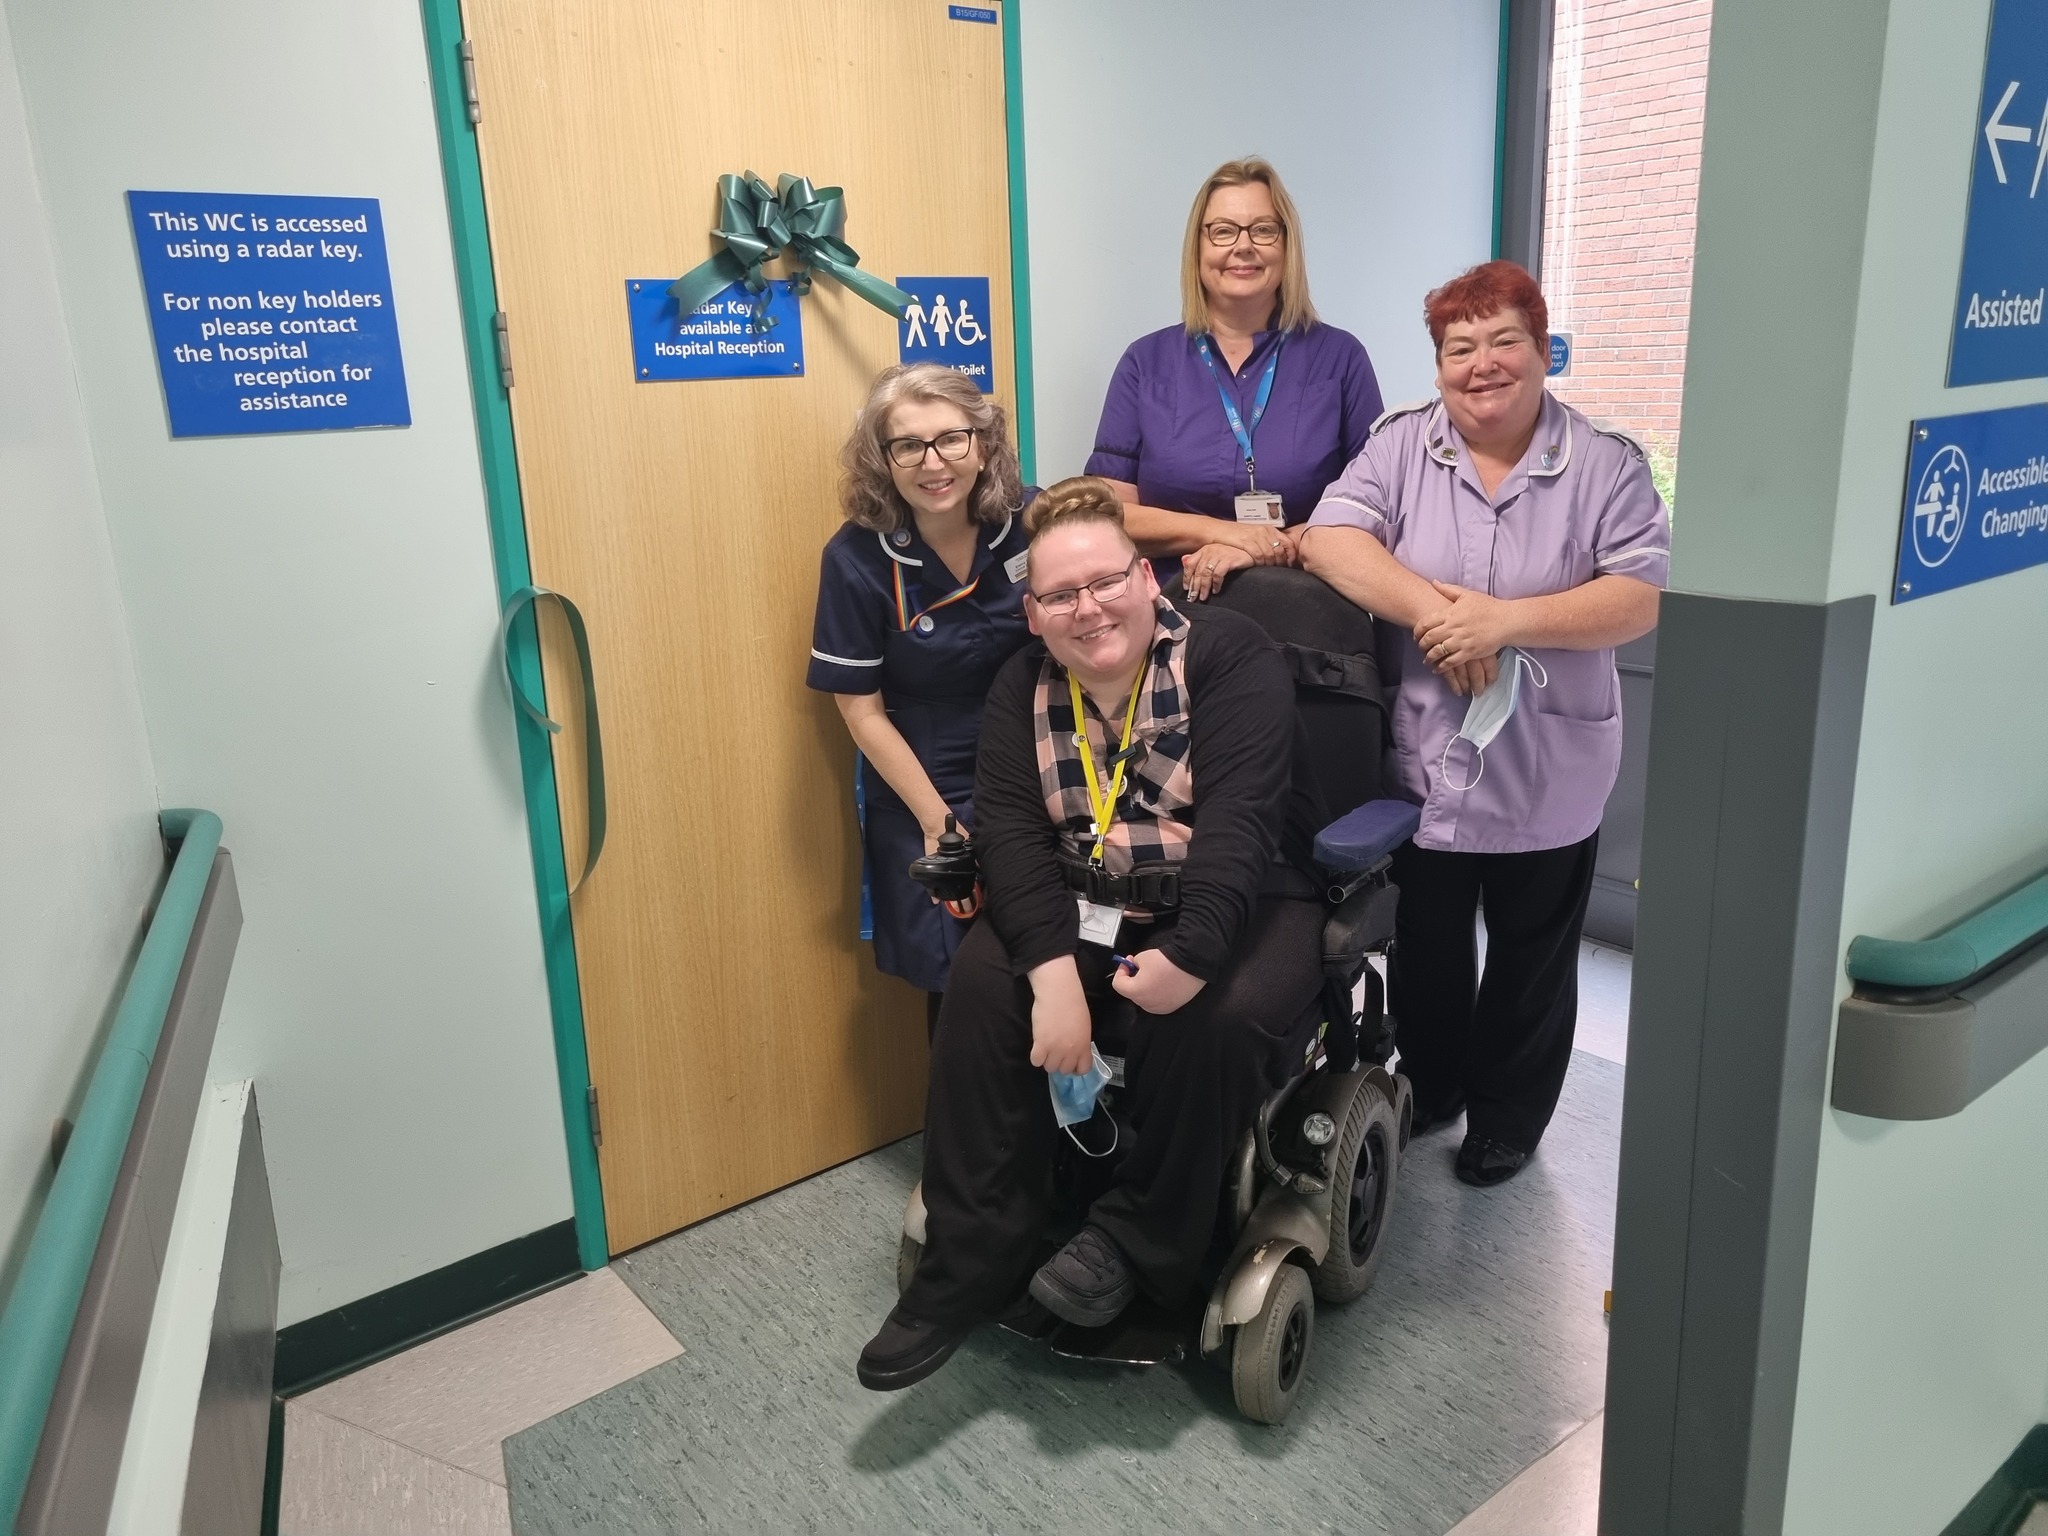 Wheelchair user and staff